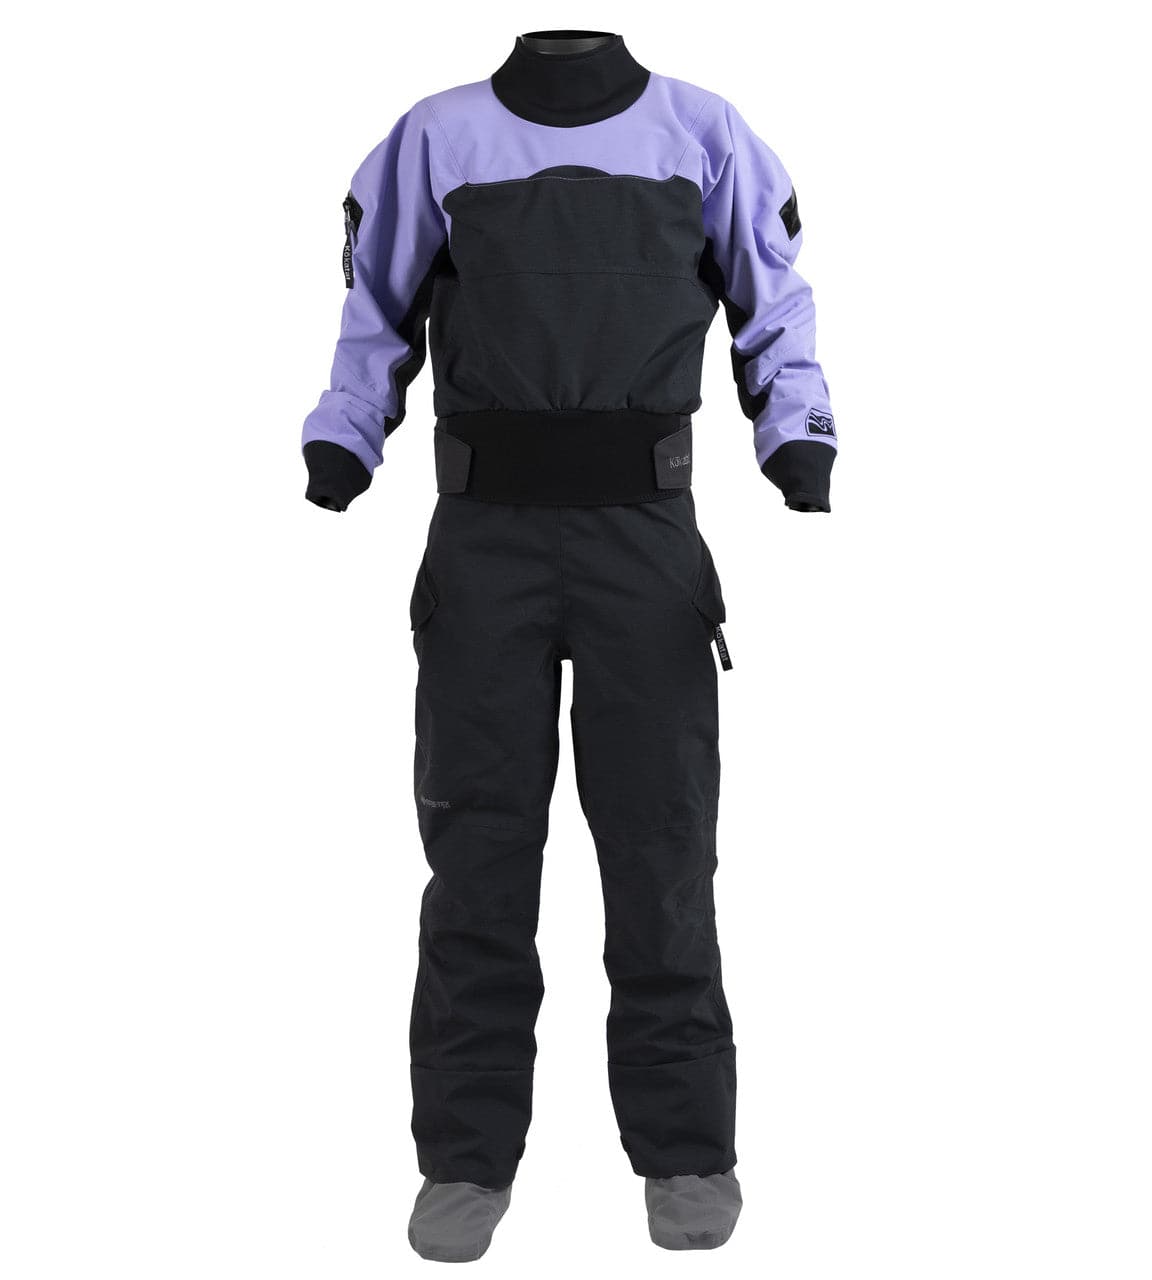 Featuring the Icon GORE-TEX Pro Drysuit - Women's women's dry wear manufactured by Kokatat shown here from a third angle.